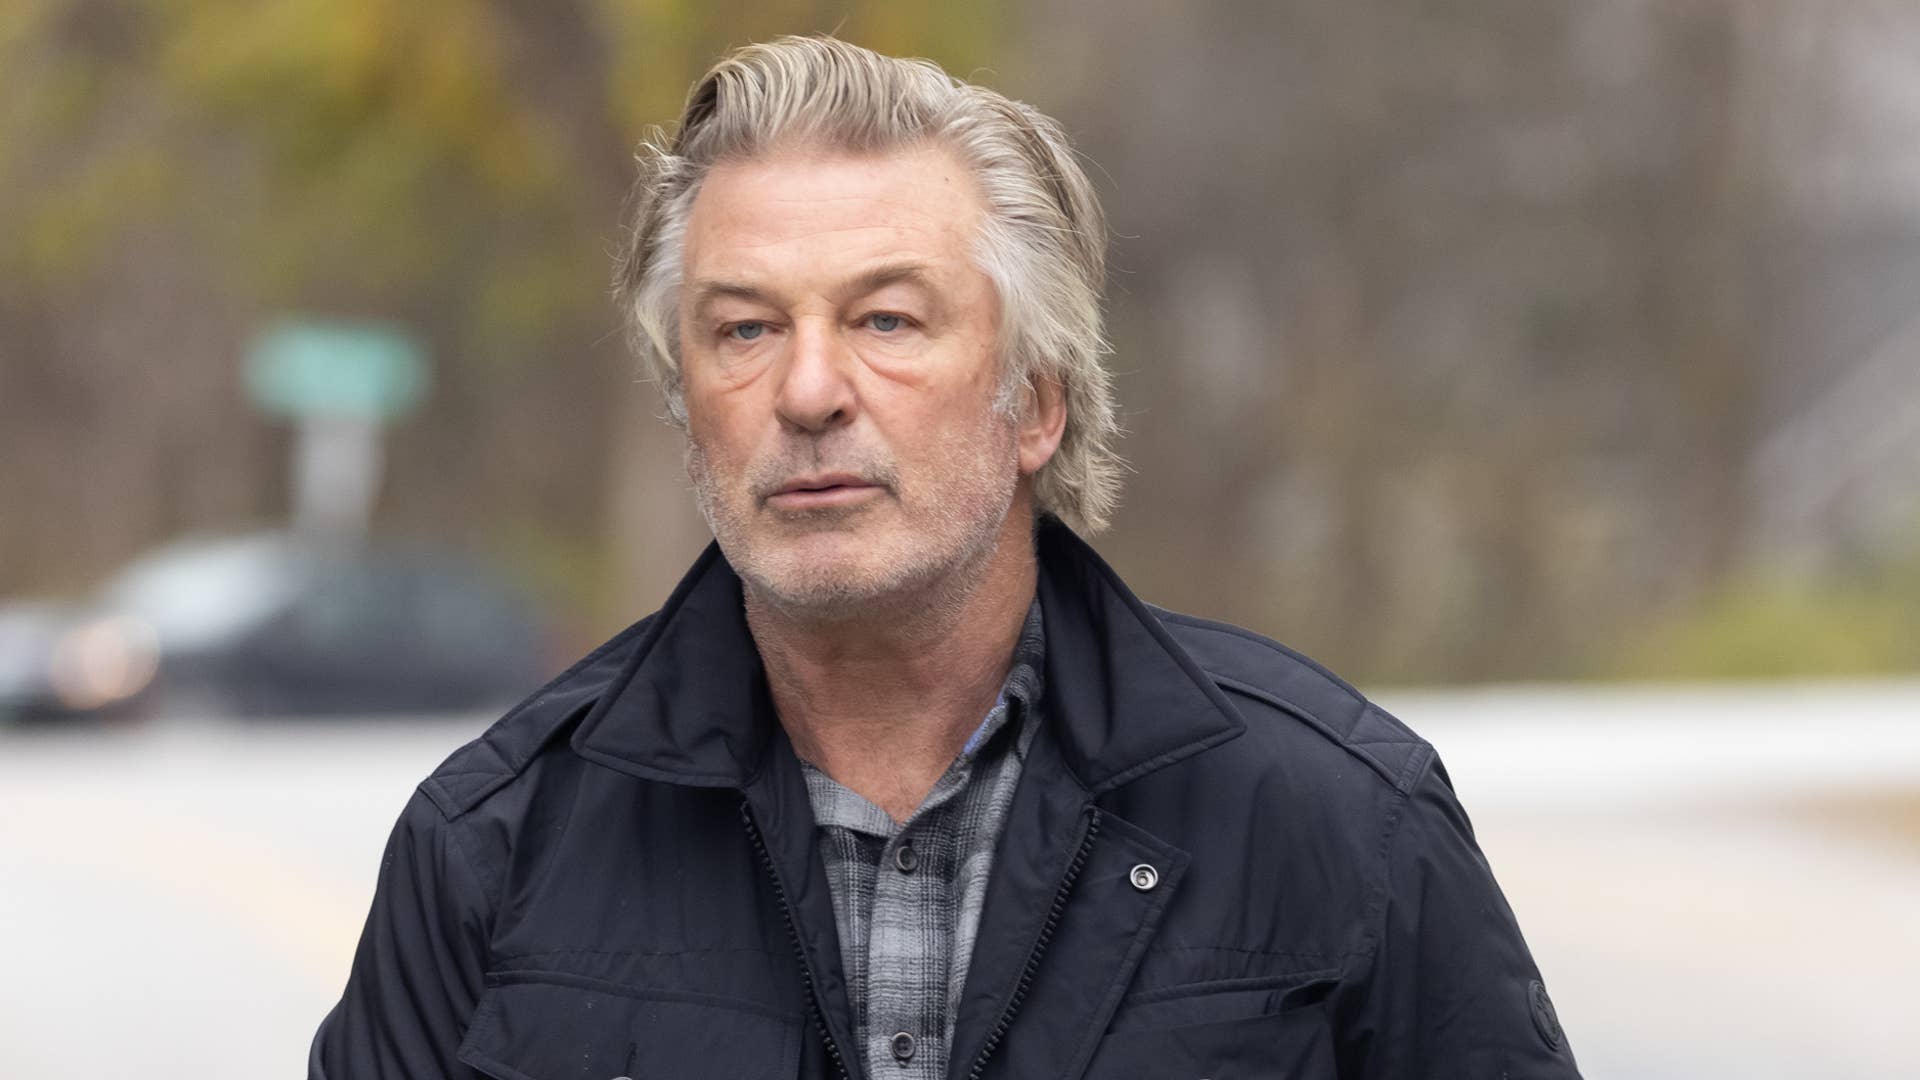 Alec Baldwin speaks for reporters after Halyna Hutchins' fatal shooting.